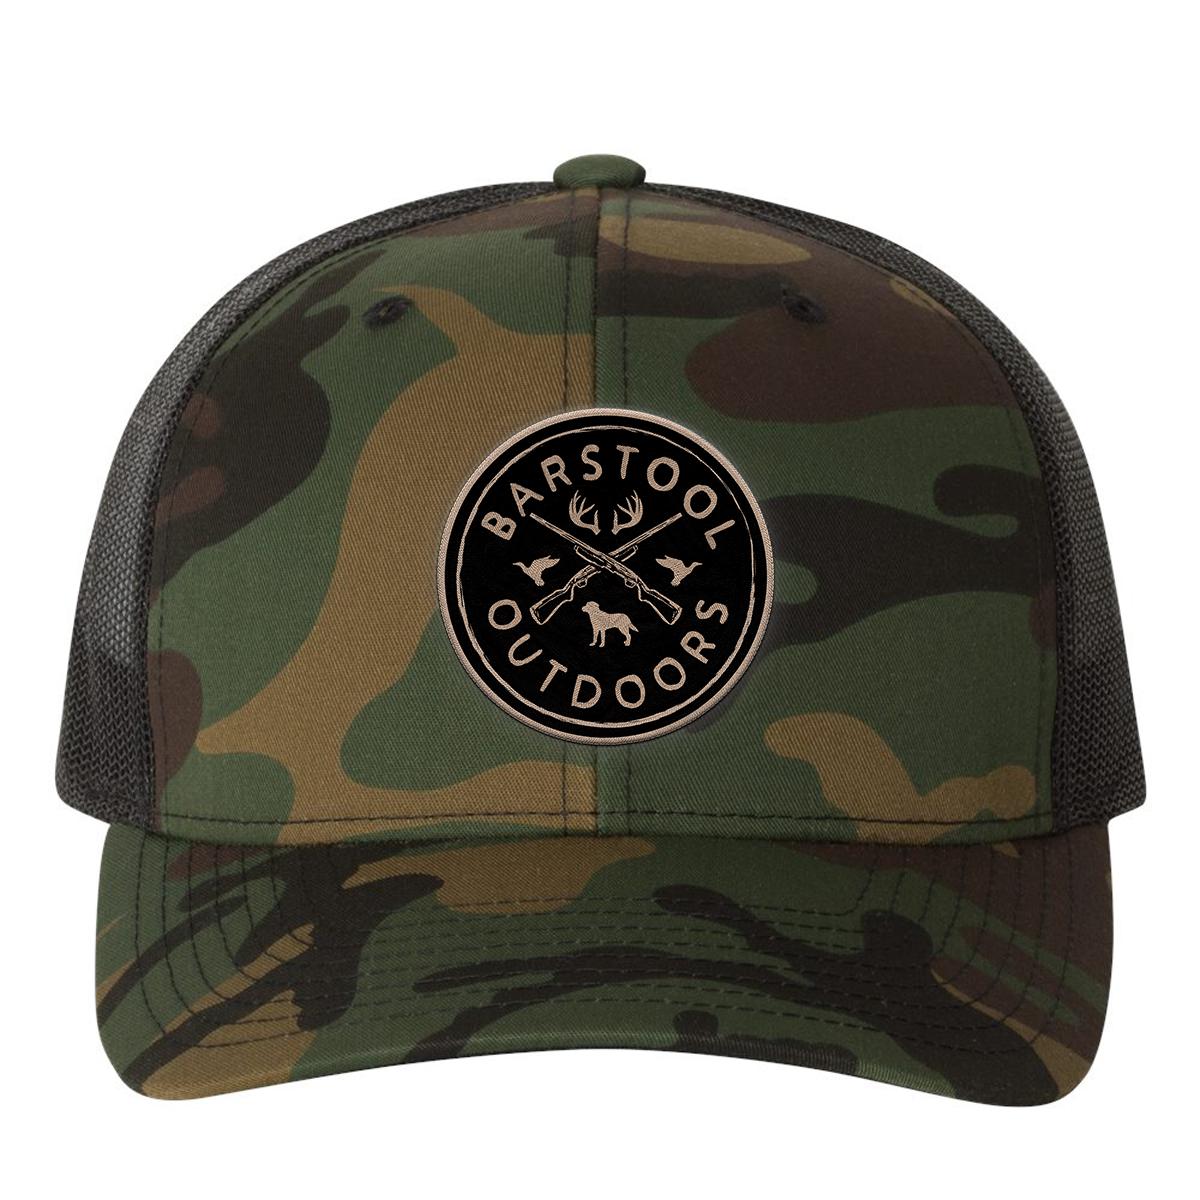 Barstool Outdoors Hunting Patch Hat-Hats-Barstool Outdoors-One Size-Camo-Barstool Sports